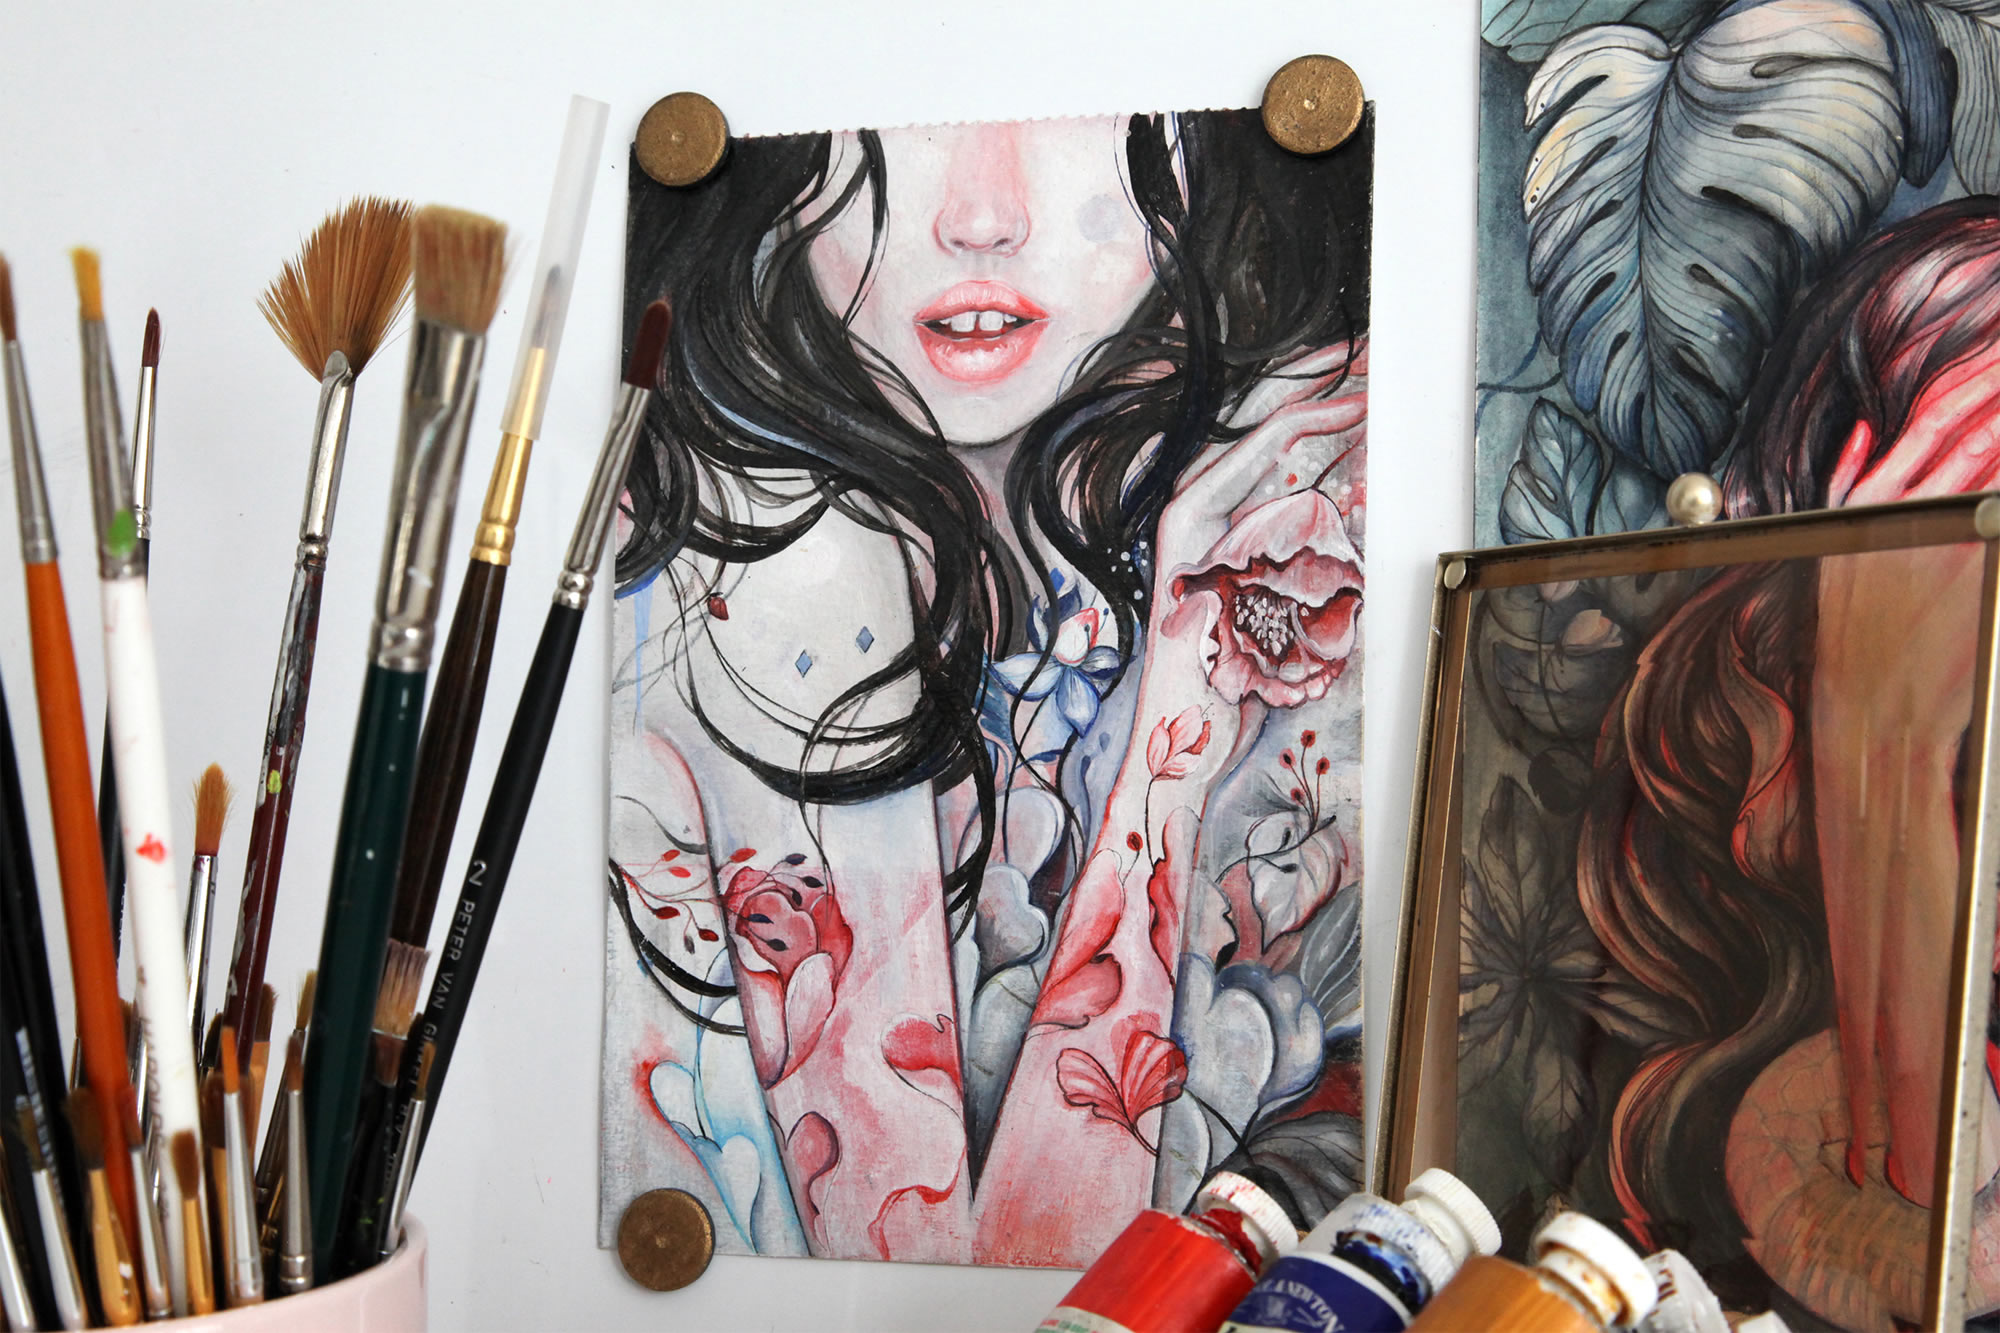 painting of tattooed girl, paintbrushes and paints